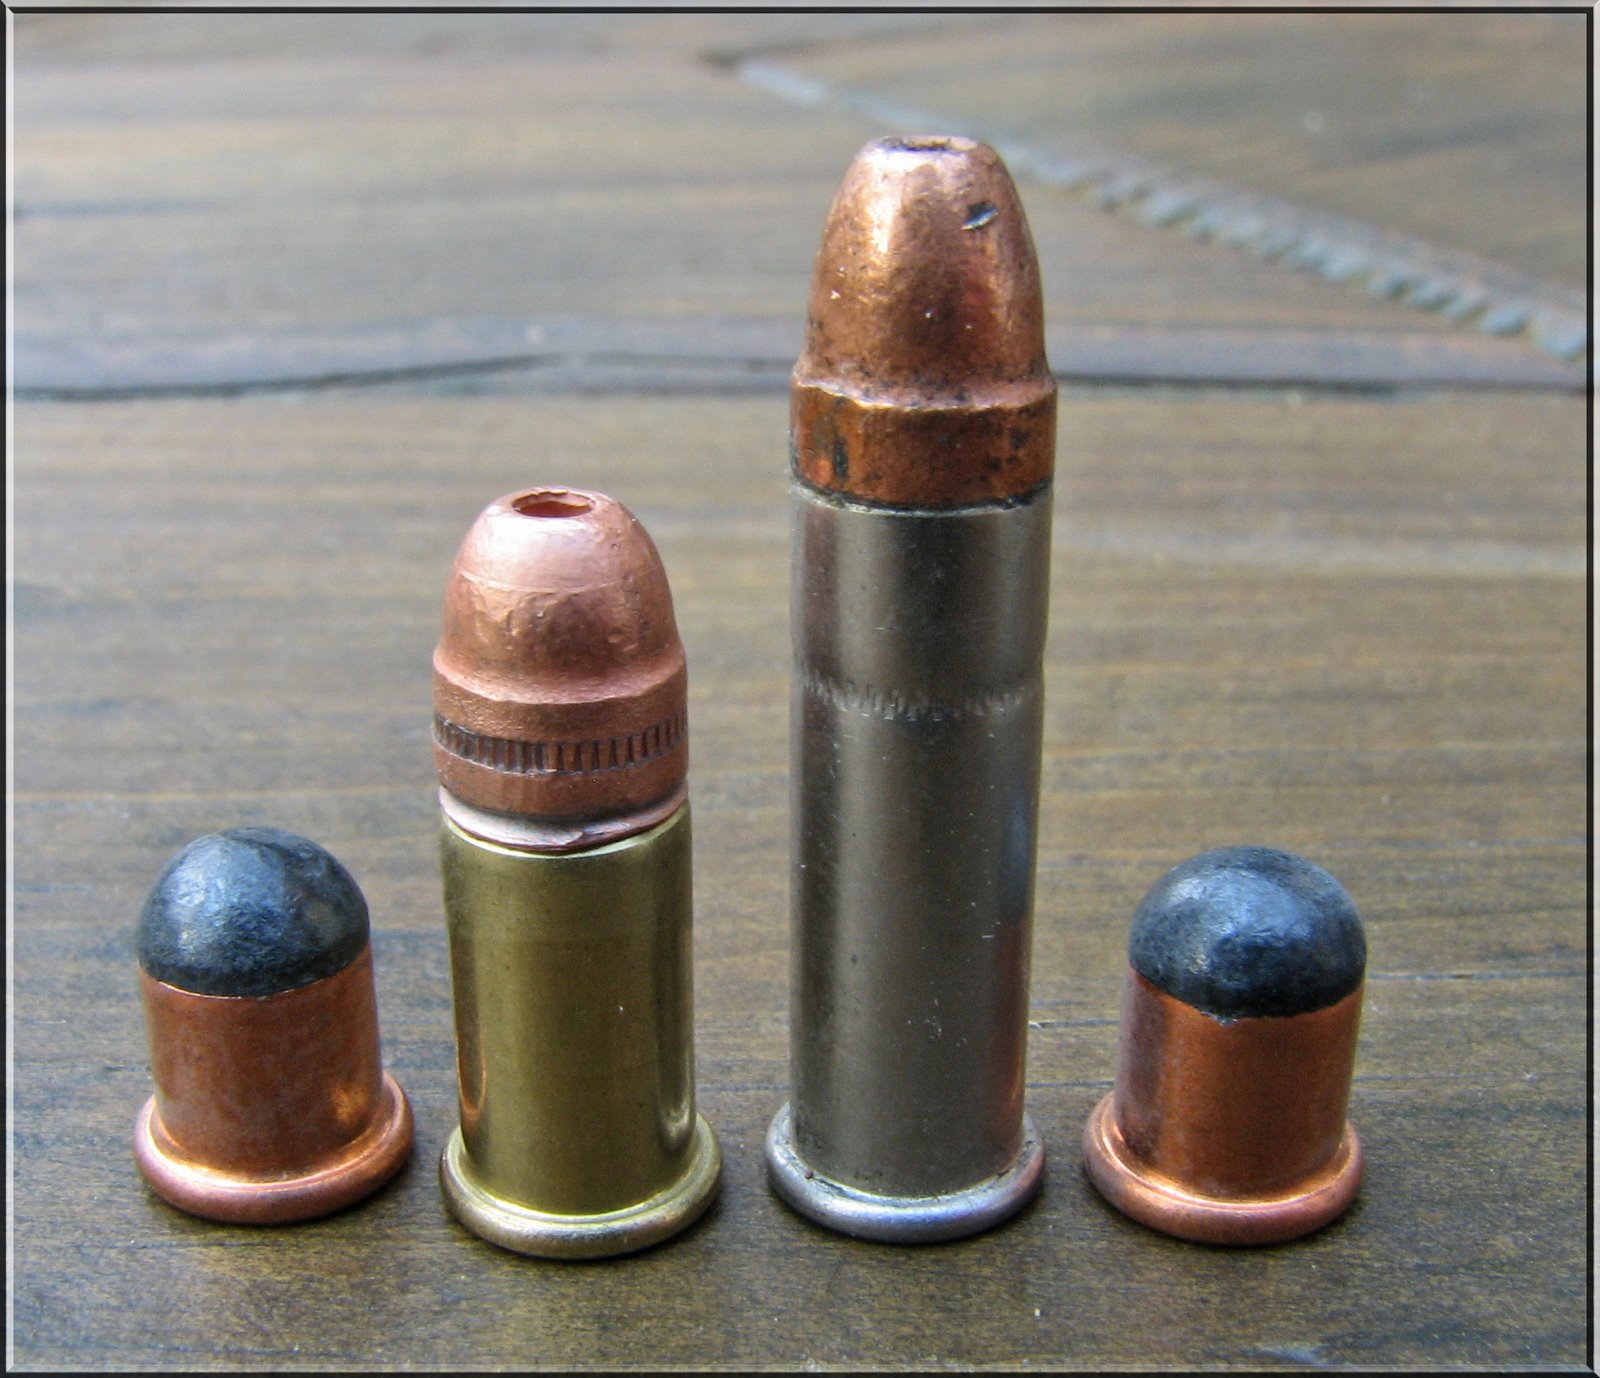 From left to right BB cap, .22 Short, .22 Long Rifle, and another BB Cap. (Picture courtesy of carteach0.blogspot.hk)